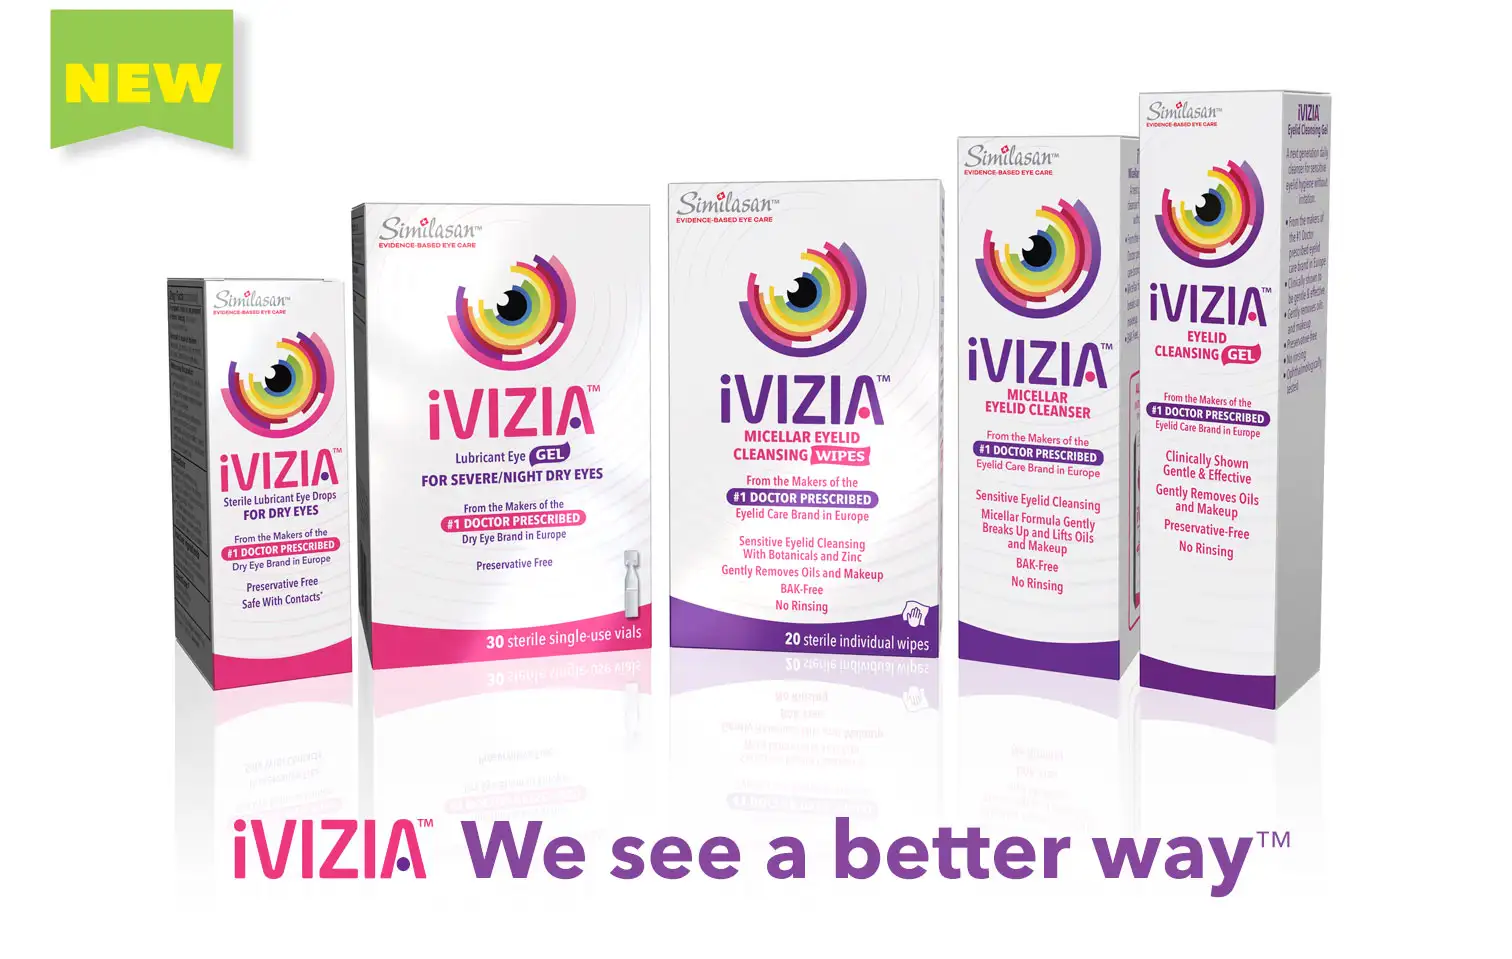 iVIZIA Product Line Up - We see a better way™